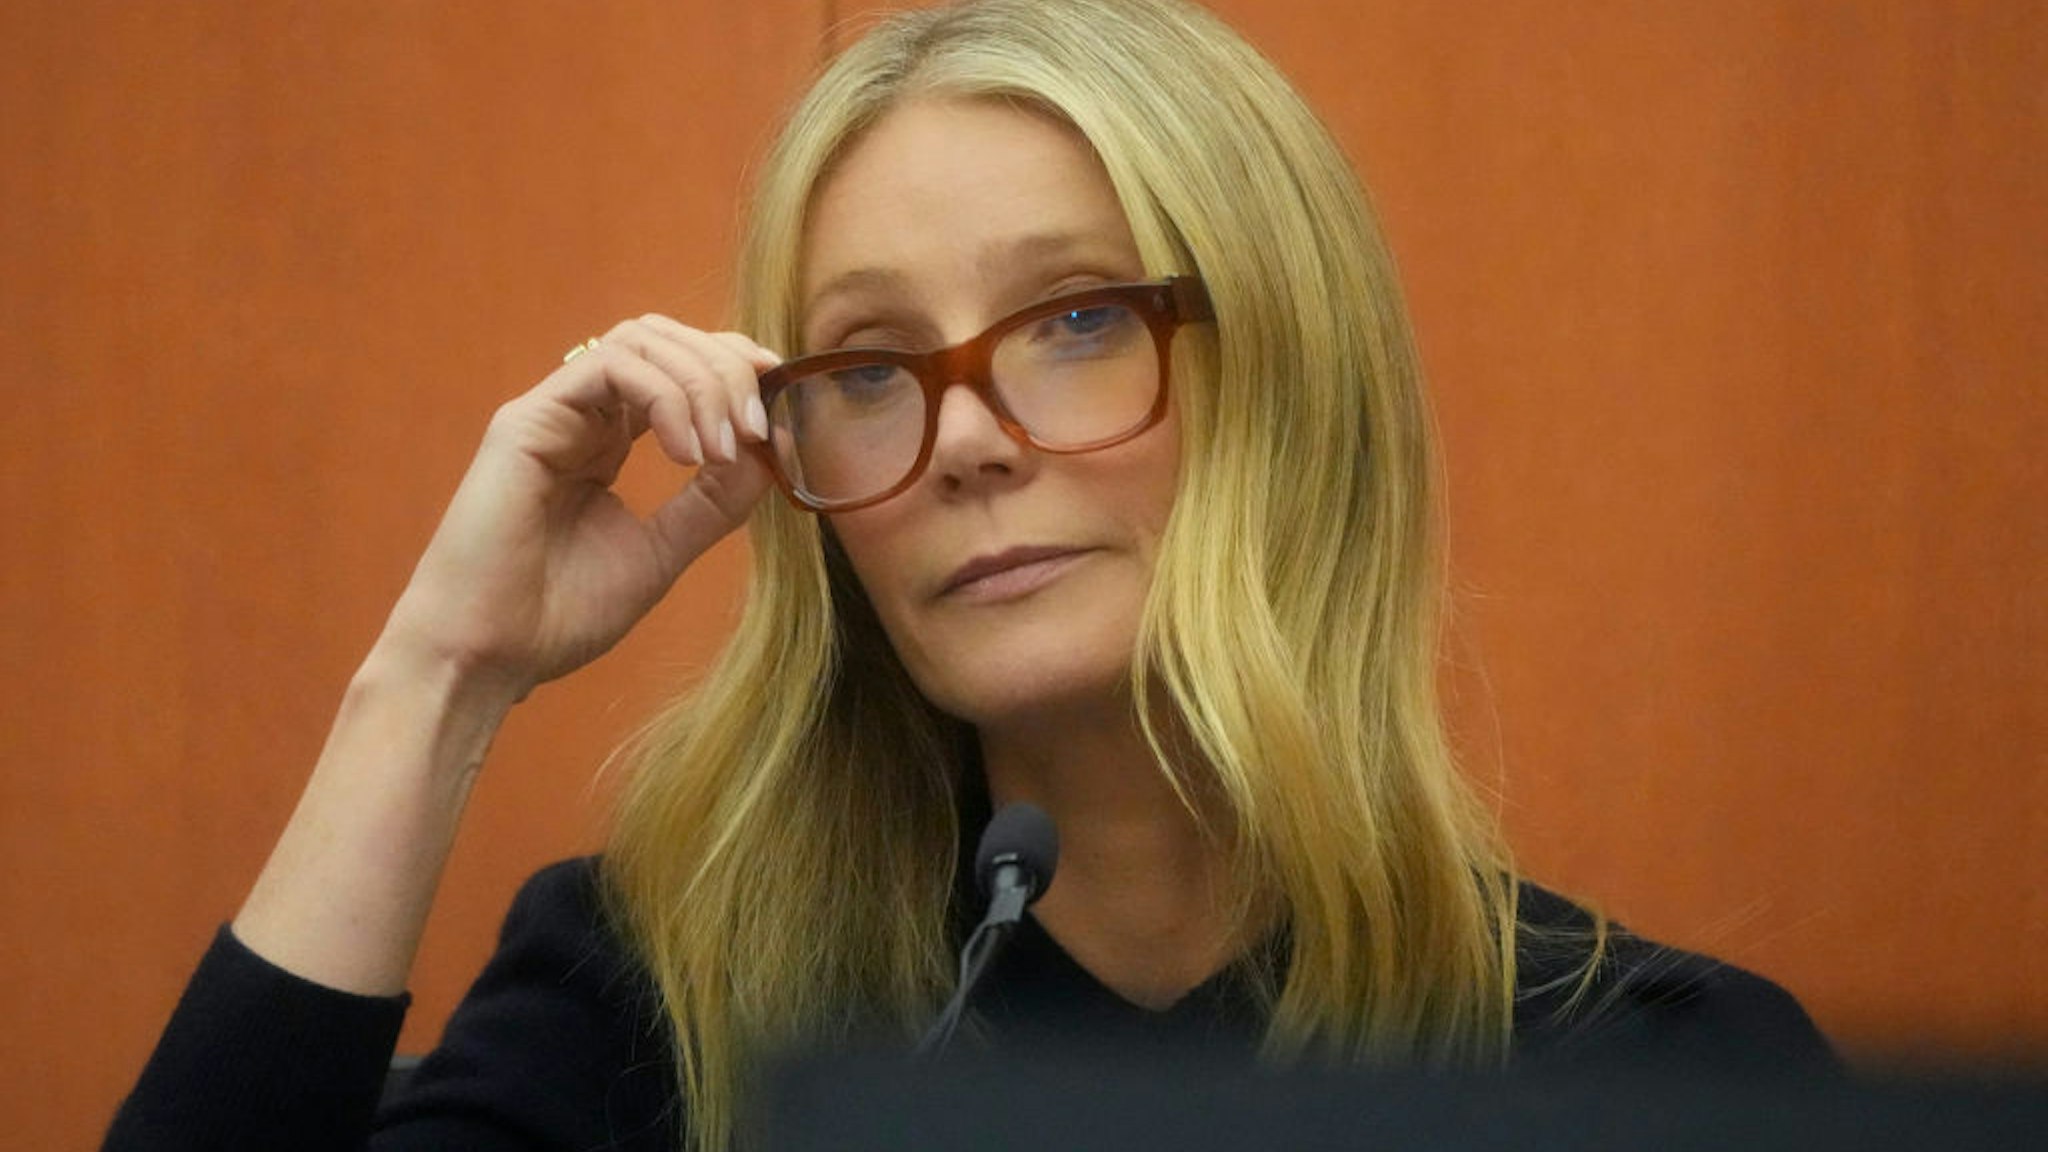 Gwyneth Paltrow testifies during her trial on March 24, 2023, in Park City, Utah. Terry Sanderson is suing actress Gwyneth Paltrow for $300,000, claiming she recklessly crashed into him while the two were skiing on a beginner run at Deer Valley Resort in Park City, Utah in 2016.